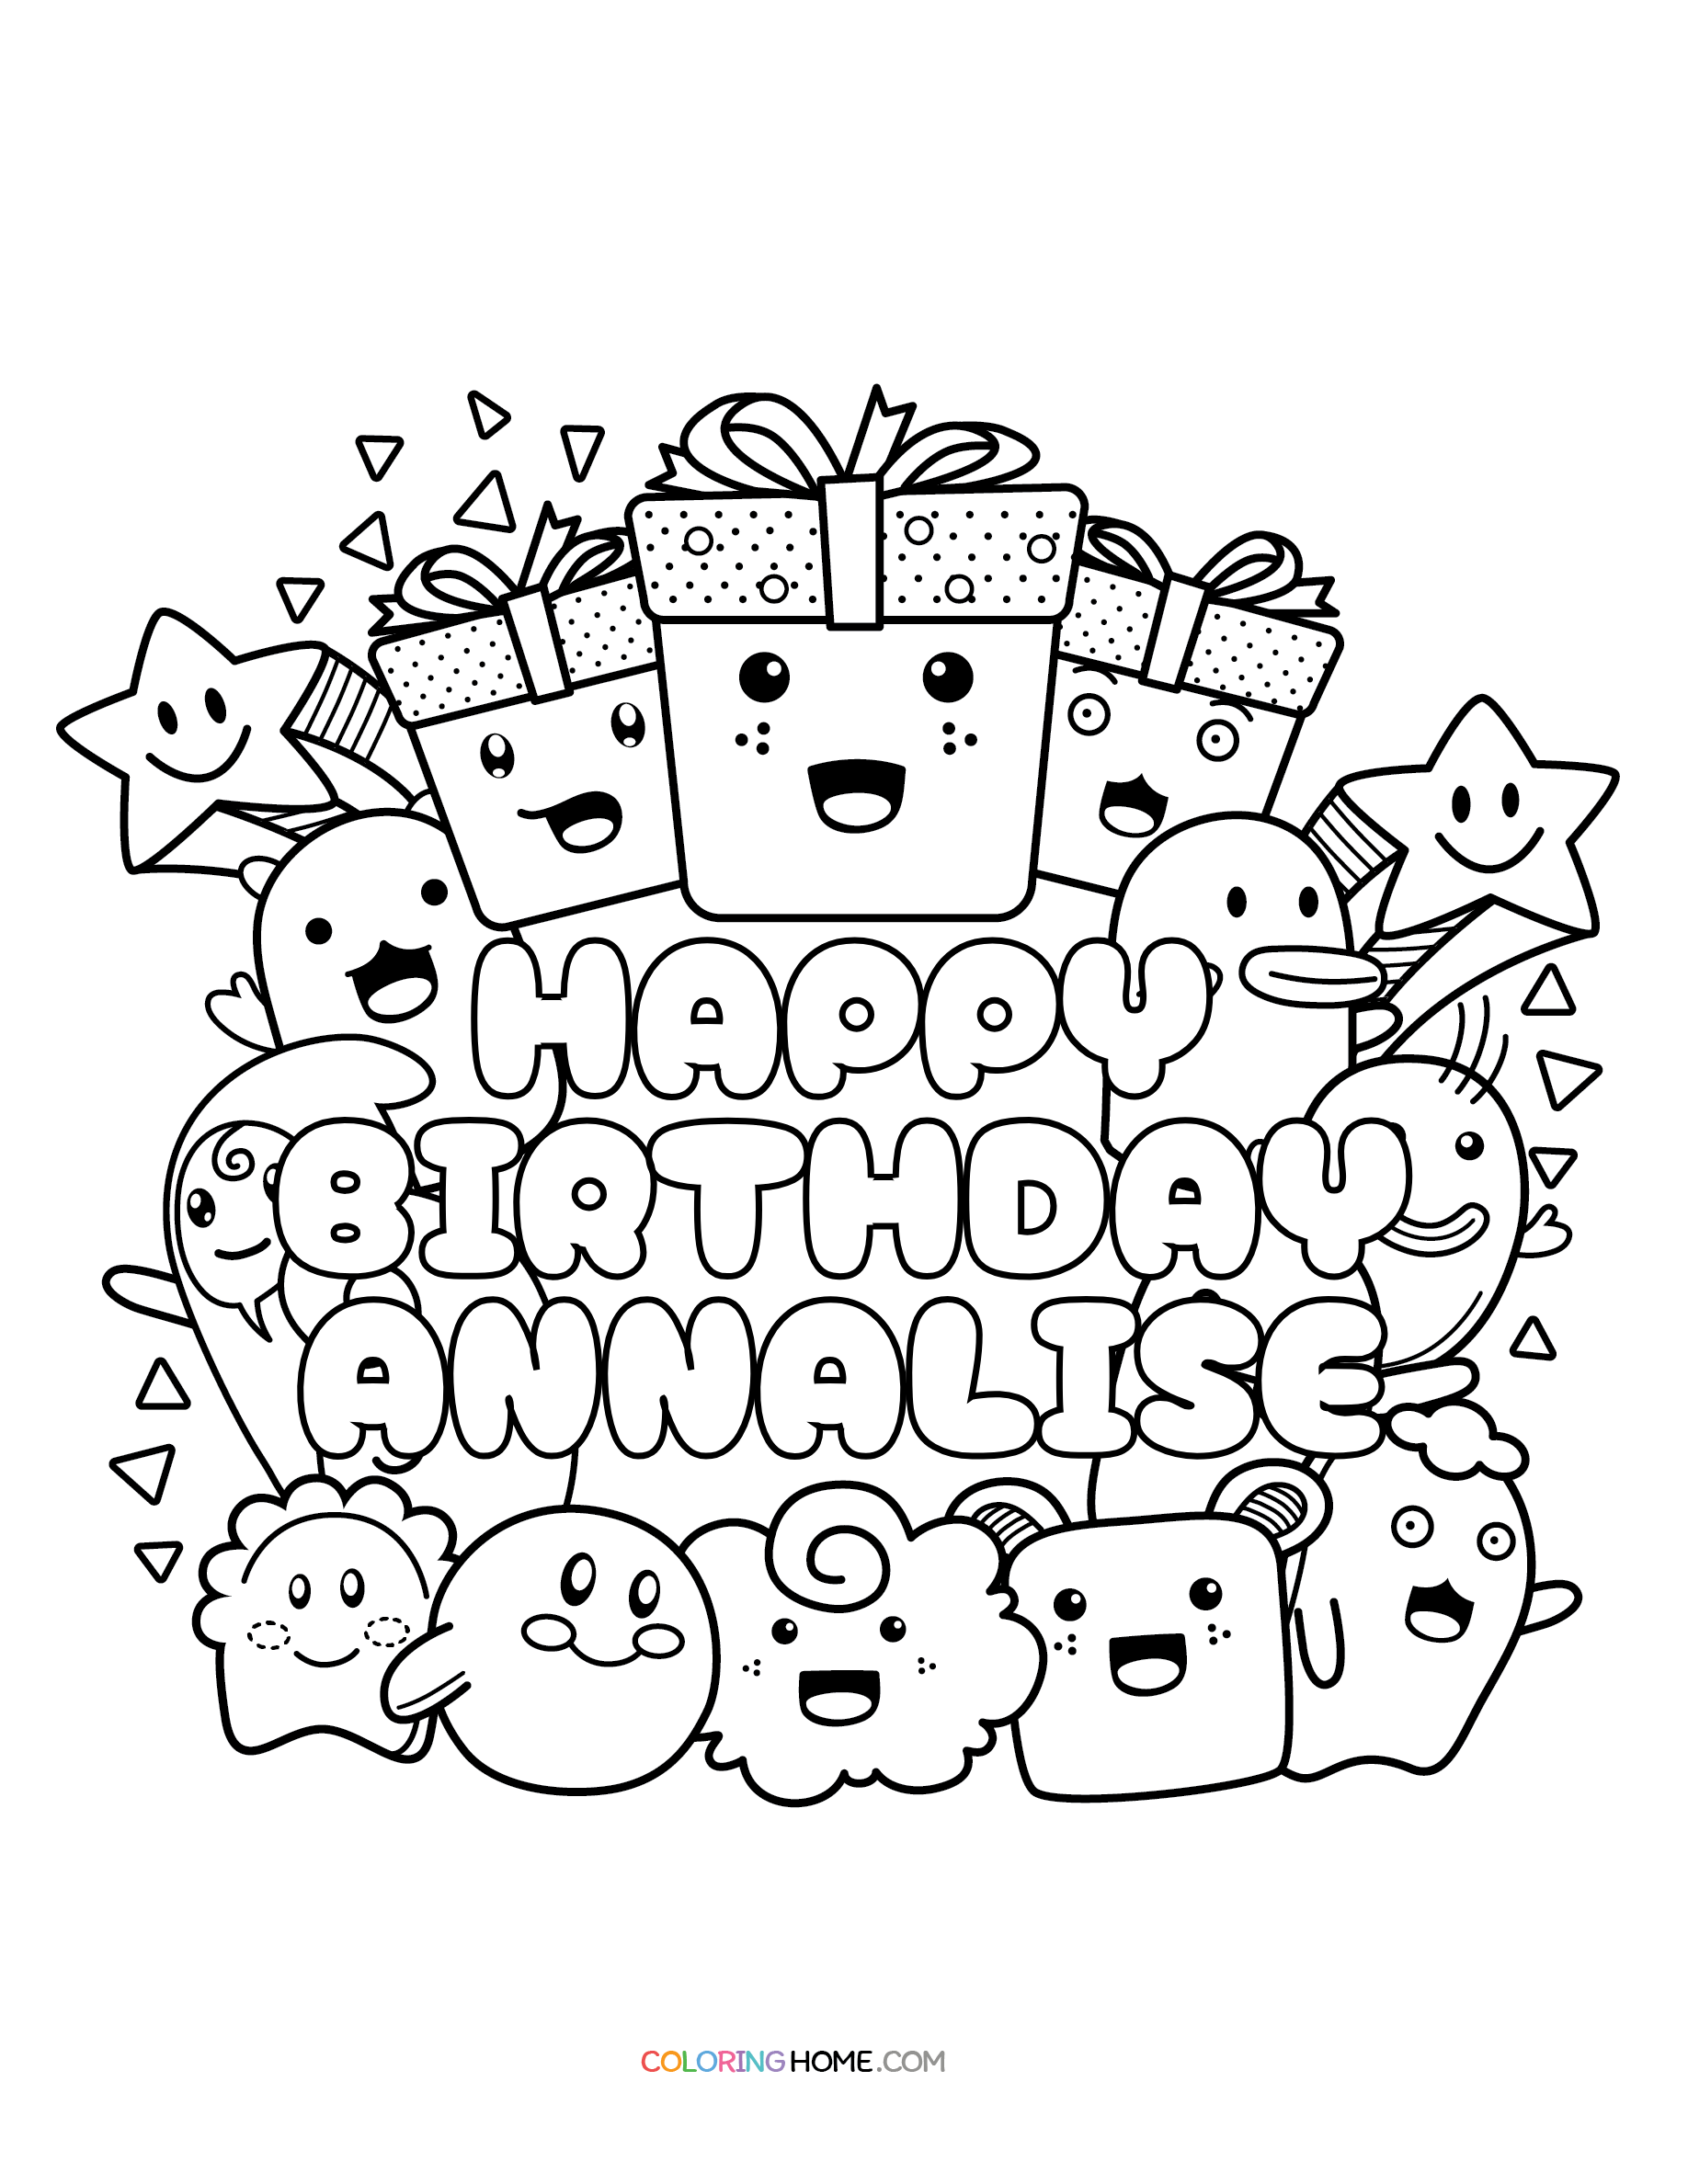 Happy Birthday Annalise coloring page